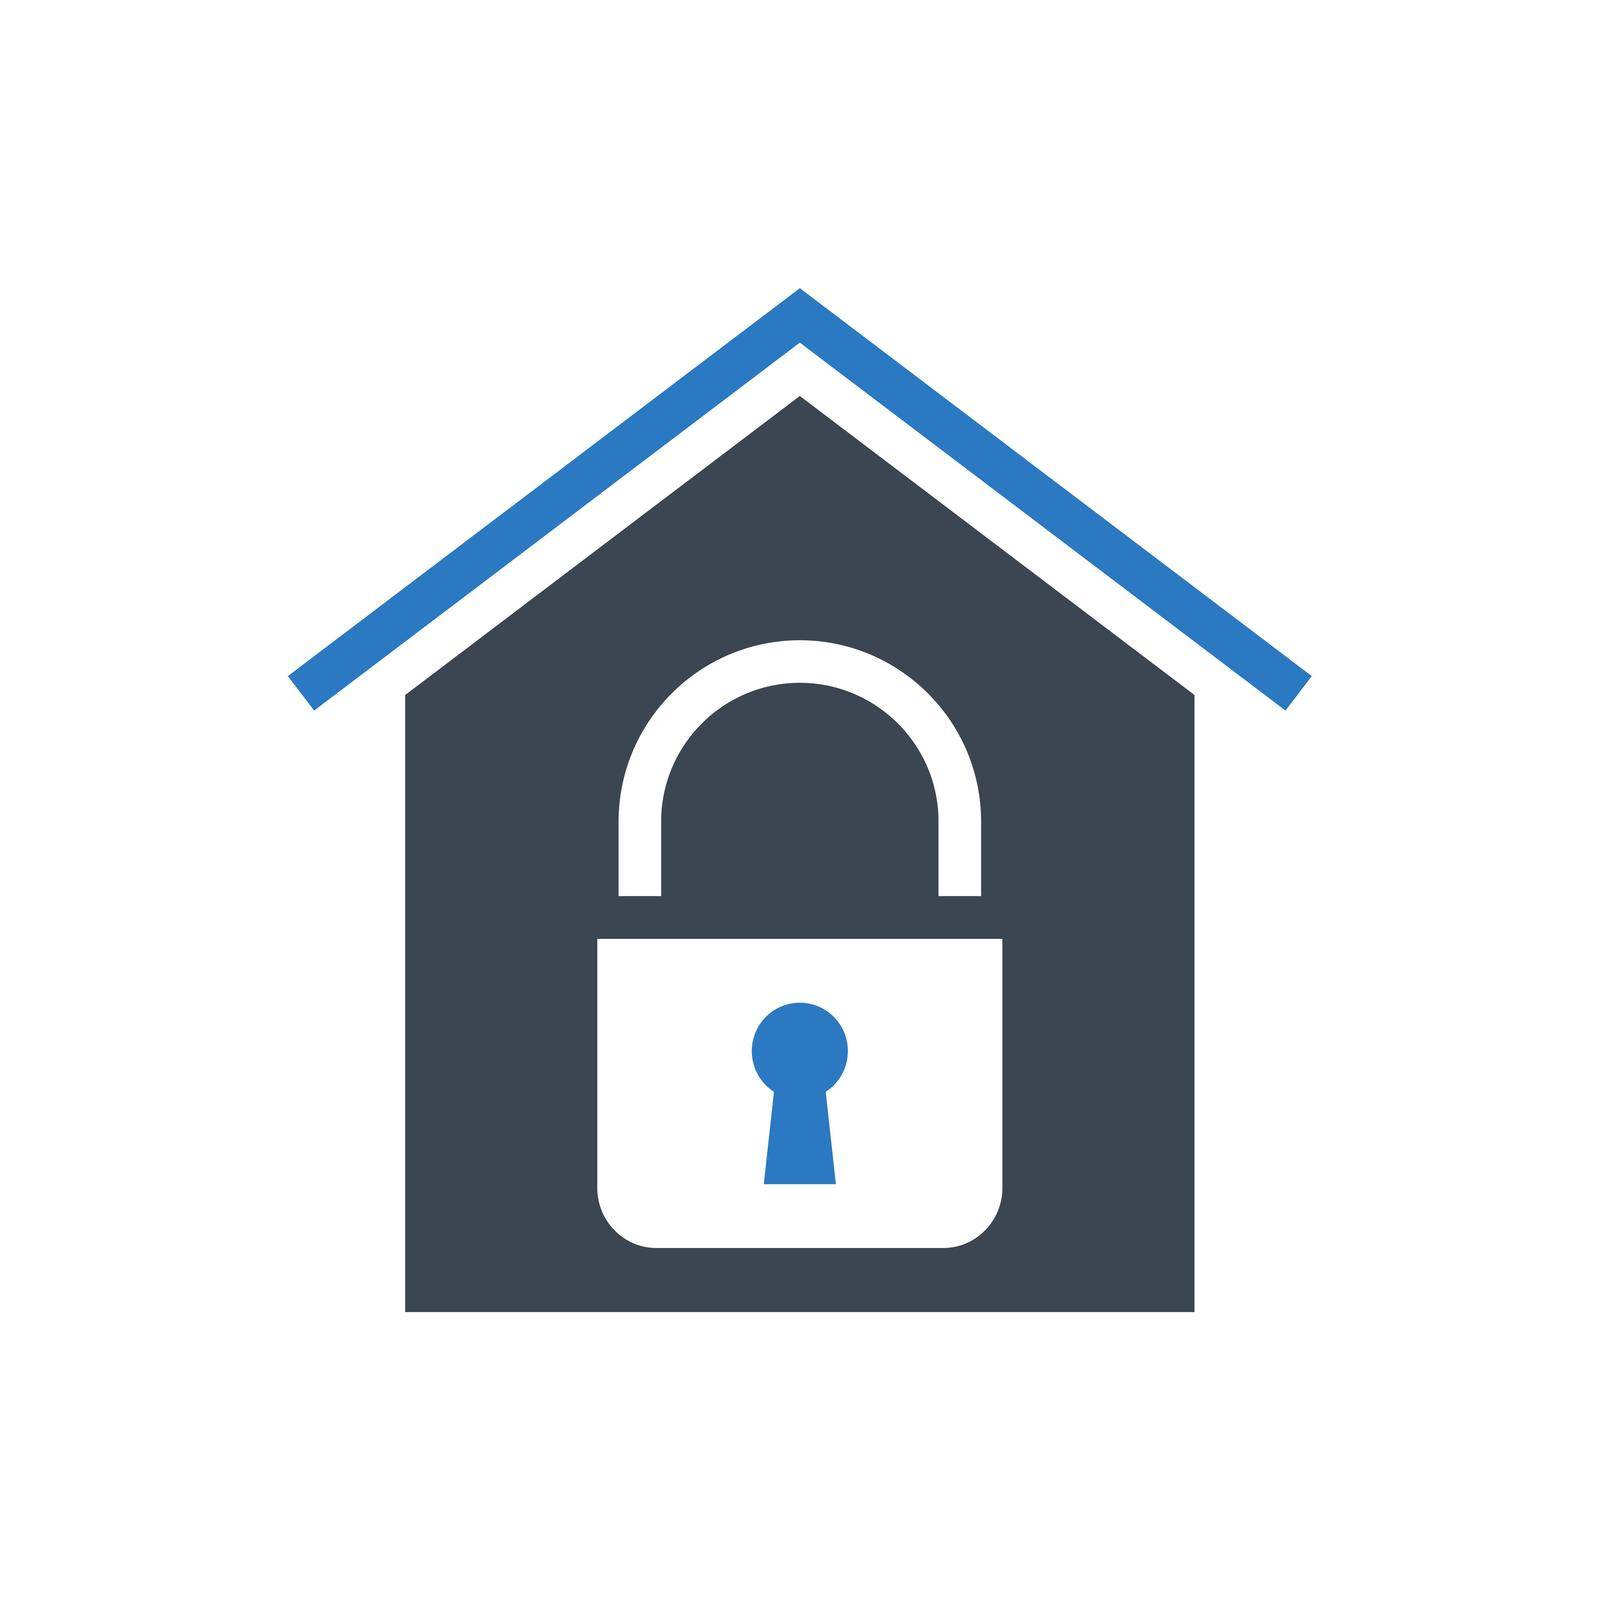 Quarantine related vector glyph icon. Simple house icon with lock inside. Quarantine sign. Isolated on white background. Editable vector illustration